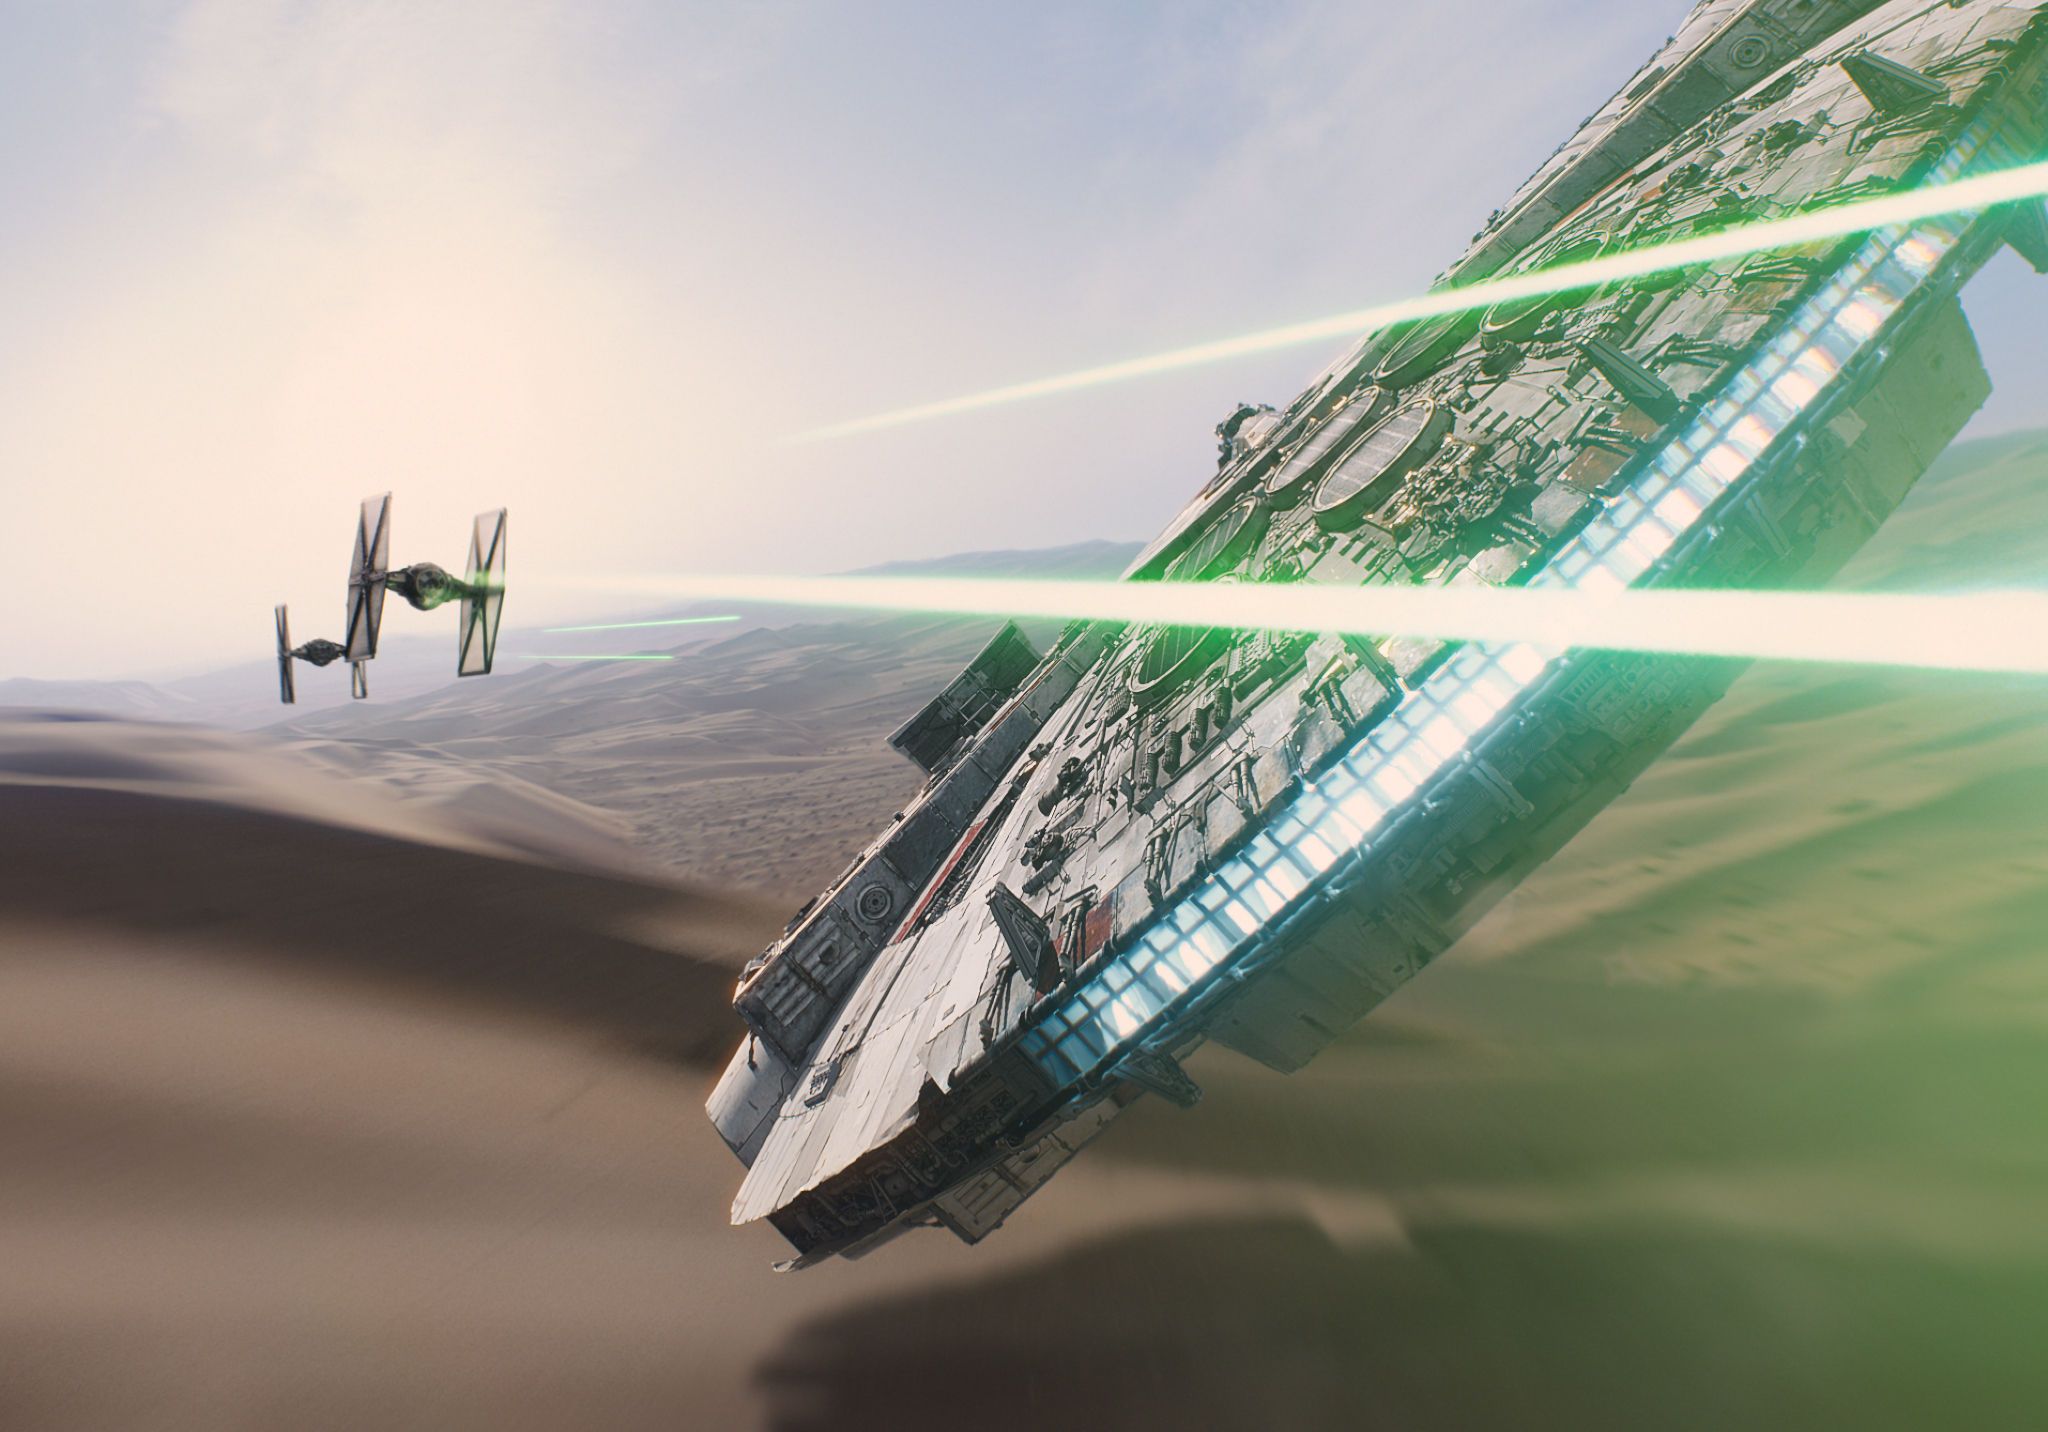 Star Wars 7: The Force Awakens - Official Millenium Falcon Photo IMAX